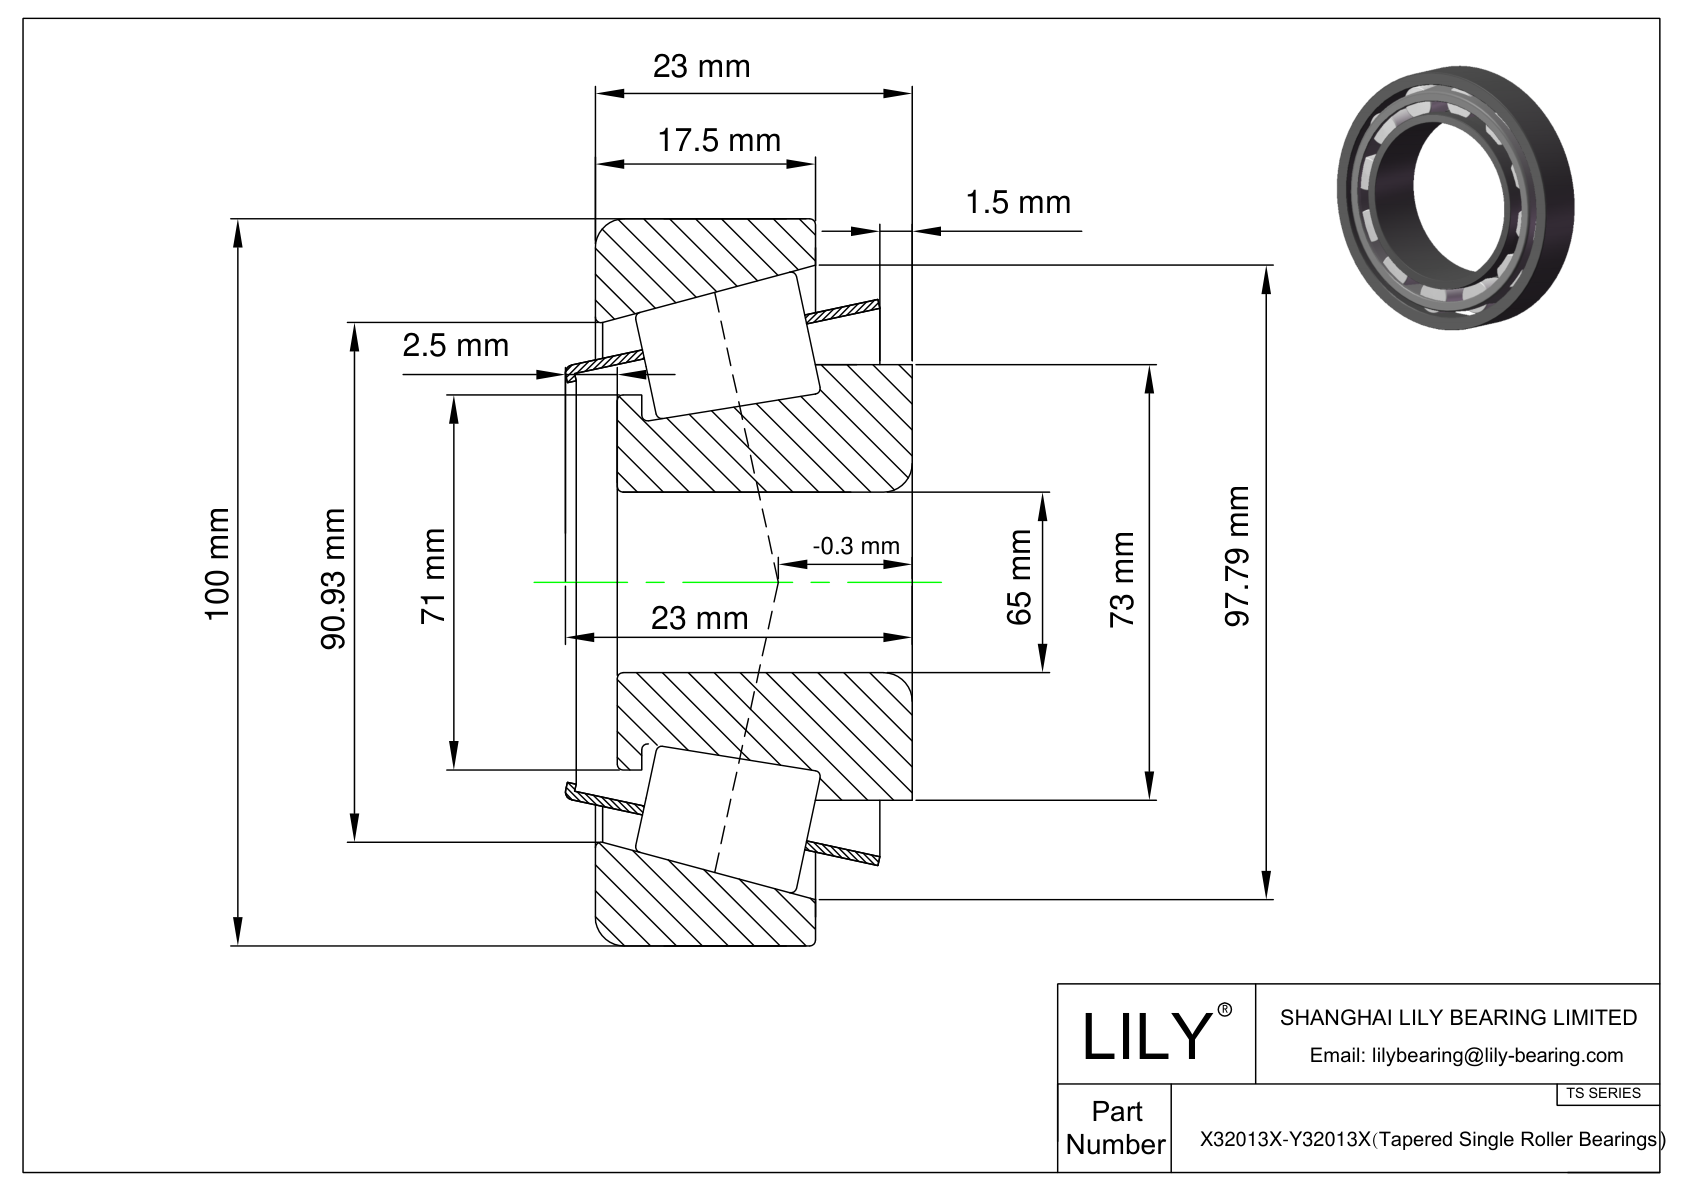 X32013X-Y32013X TS (Tapered Single Roller Bearings) (Metric) cad drawing